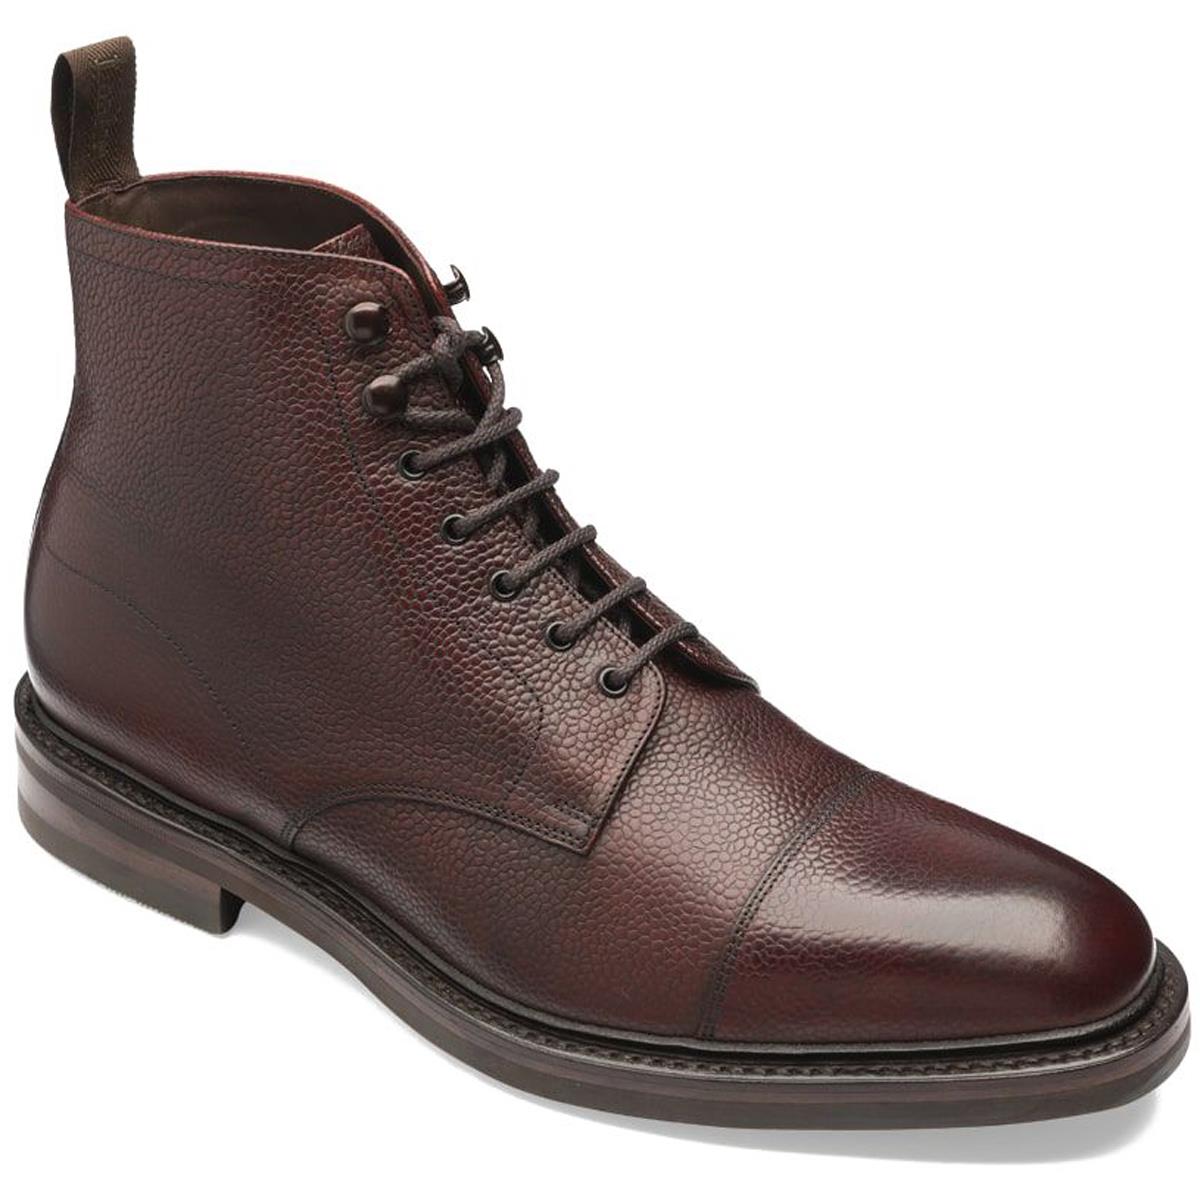 Loake Mens Roehampton Boots Questions & Answers